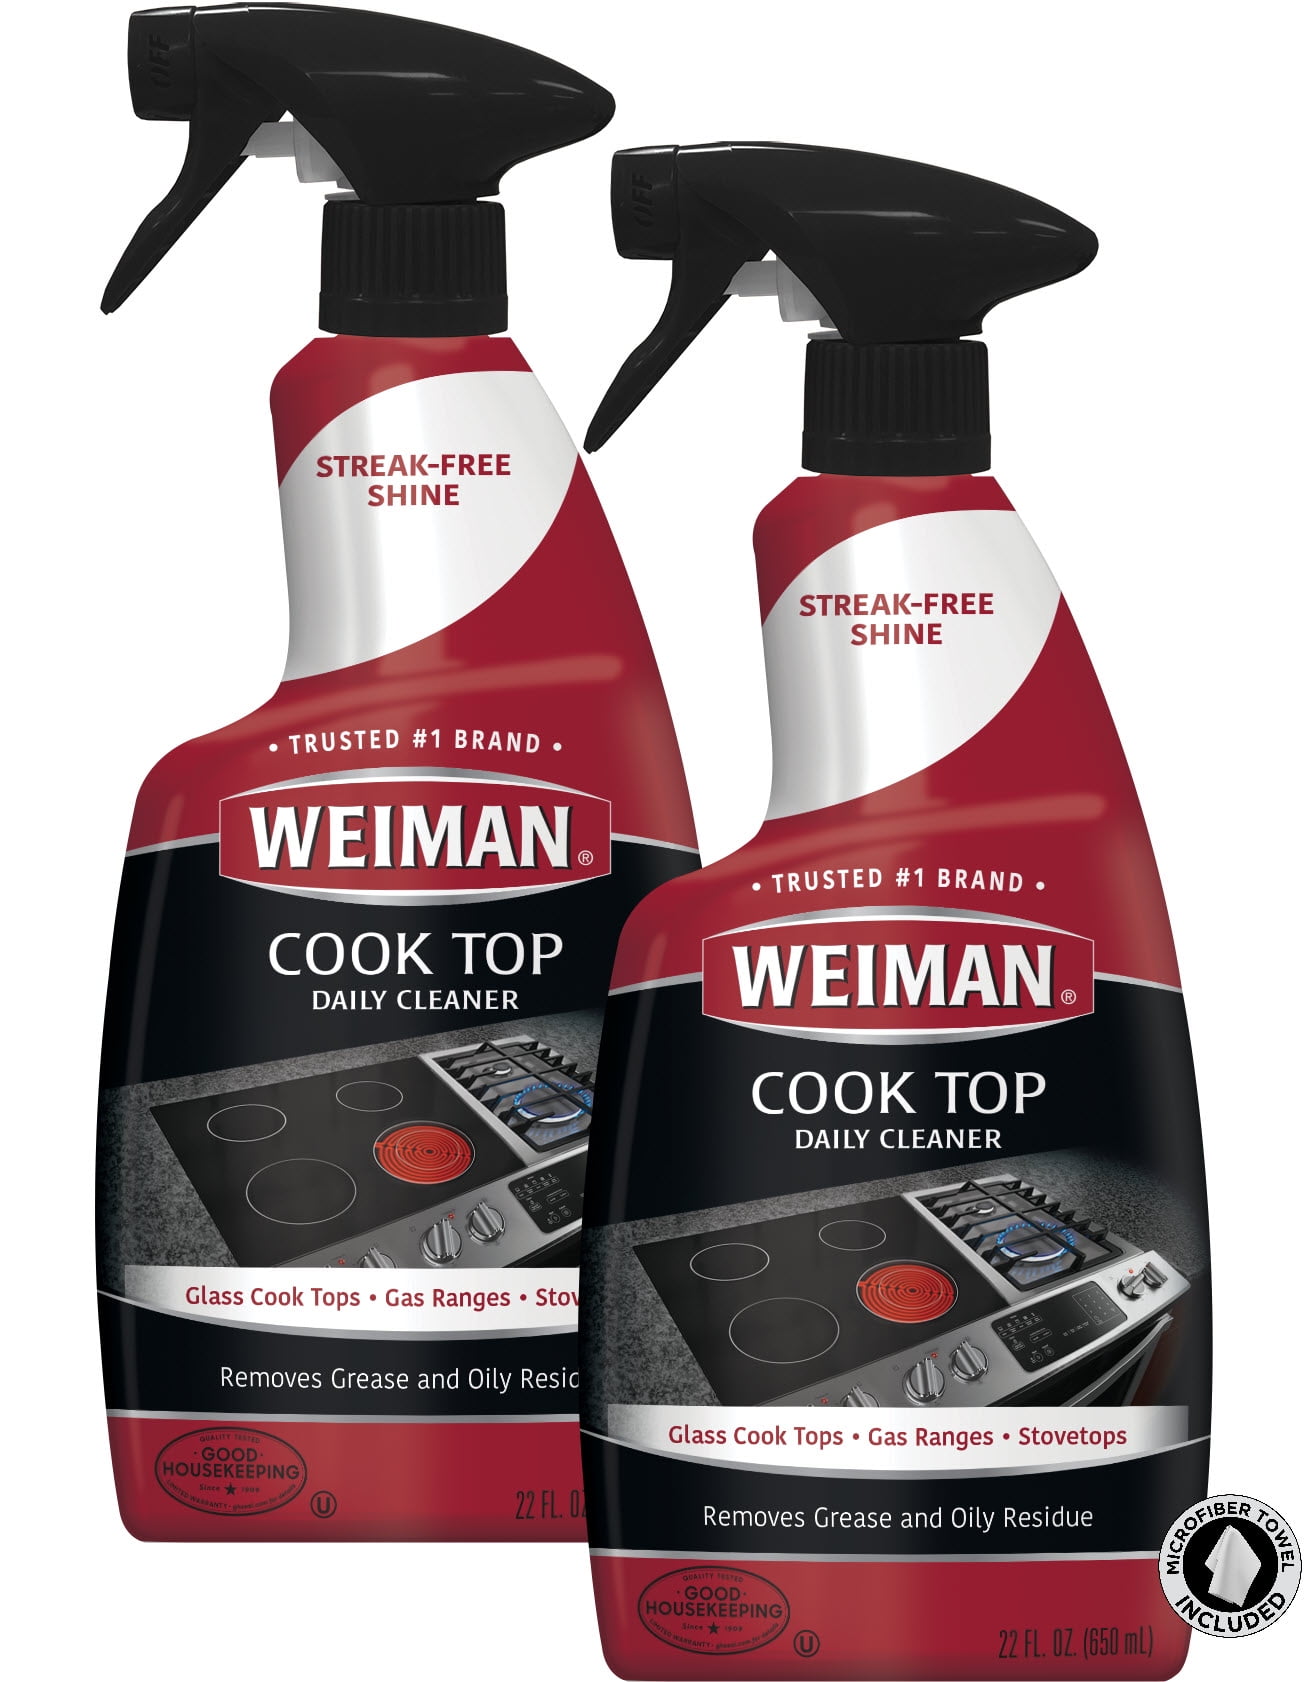 Weiman Microfiber Cloth for Stainless Steel - Safely Traps and Removes  Dirt, Oil and Grime to Protect From Scratches 1.40 x 3.56